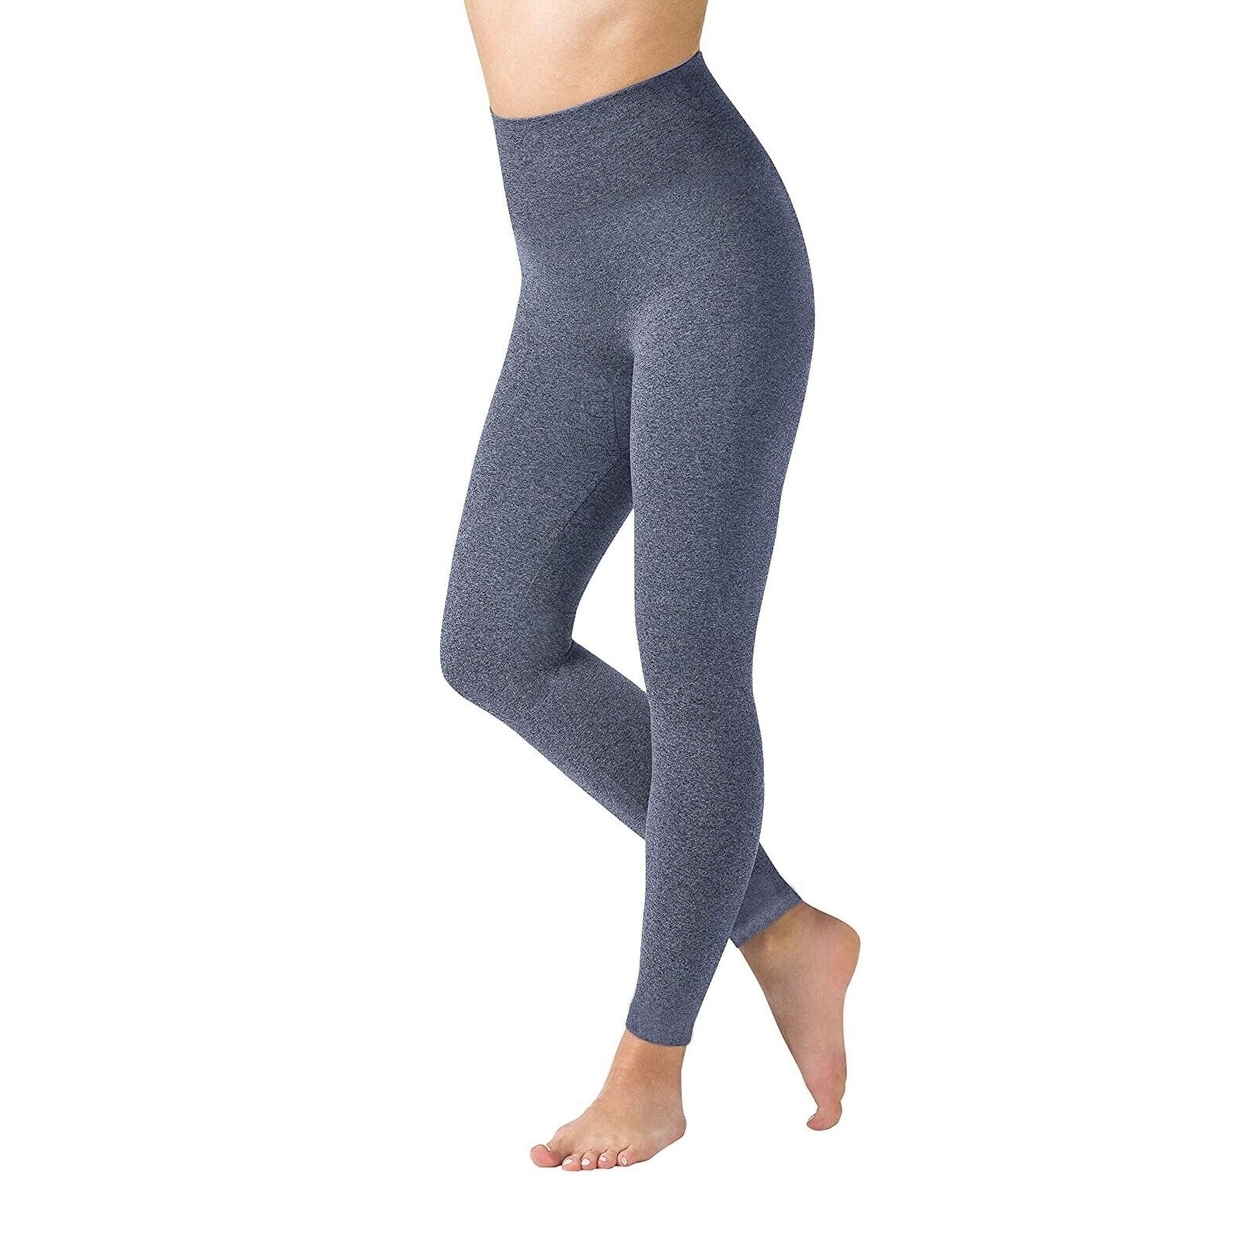 Multi-Packs Women High Waisted Fleece Lined Marled Leggings Ultra Soft Warm Pant - Charcoal/charcoal, 1, Large